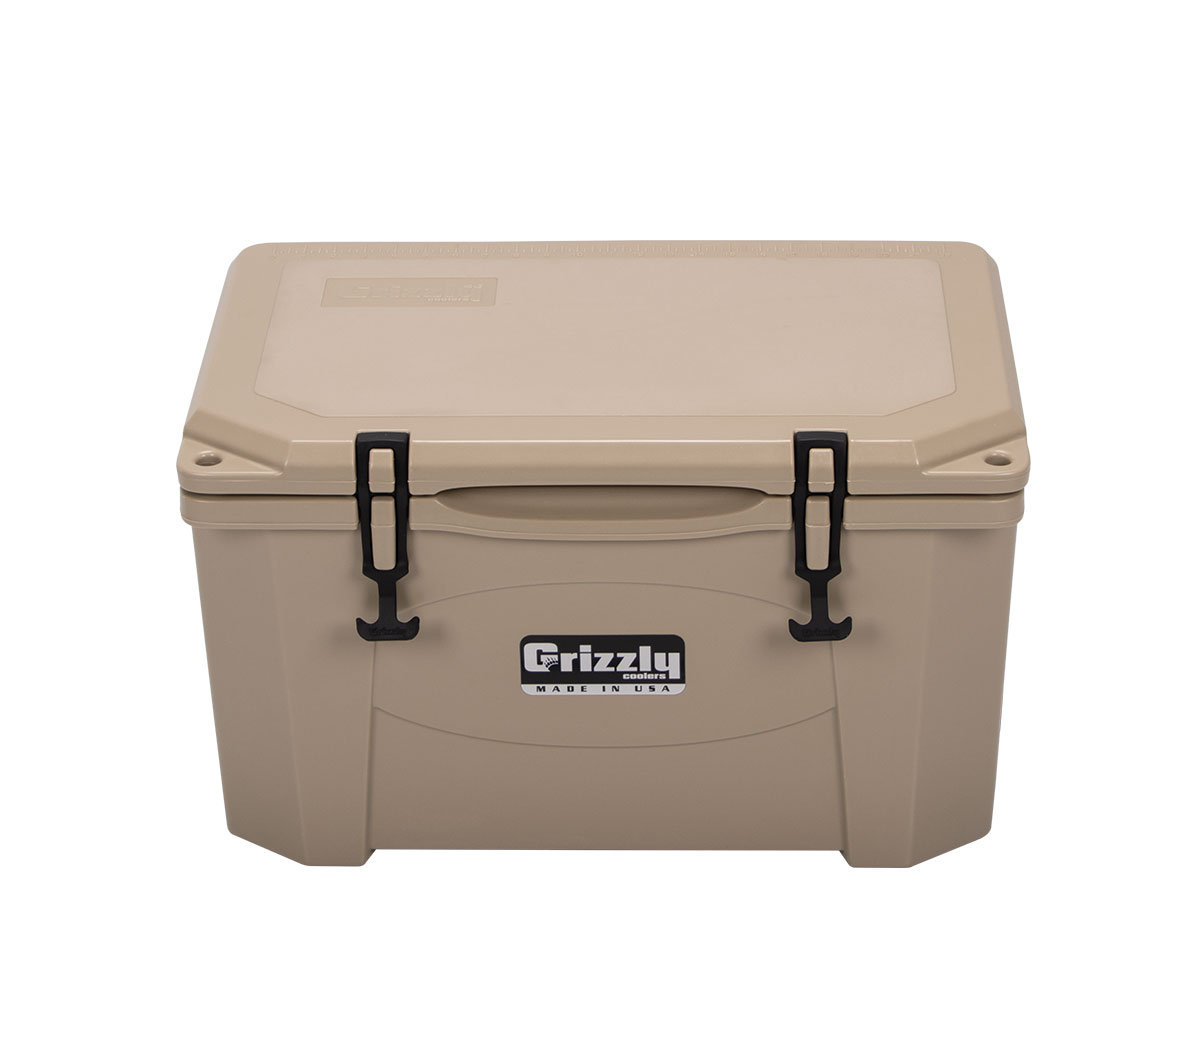 https://www.meadowcreekbbqsupply.com/wp-content/uploads/2019/12/Grizzly_Coolers_40_QT_2.jpg